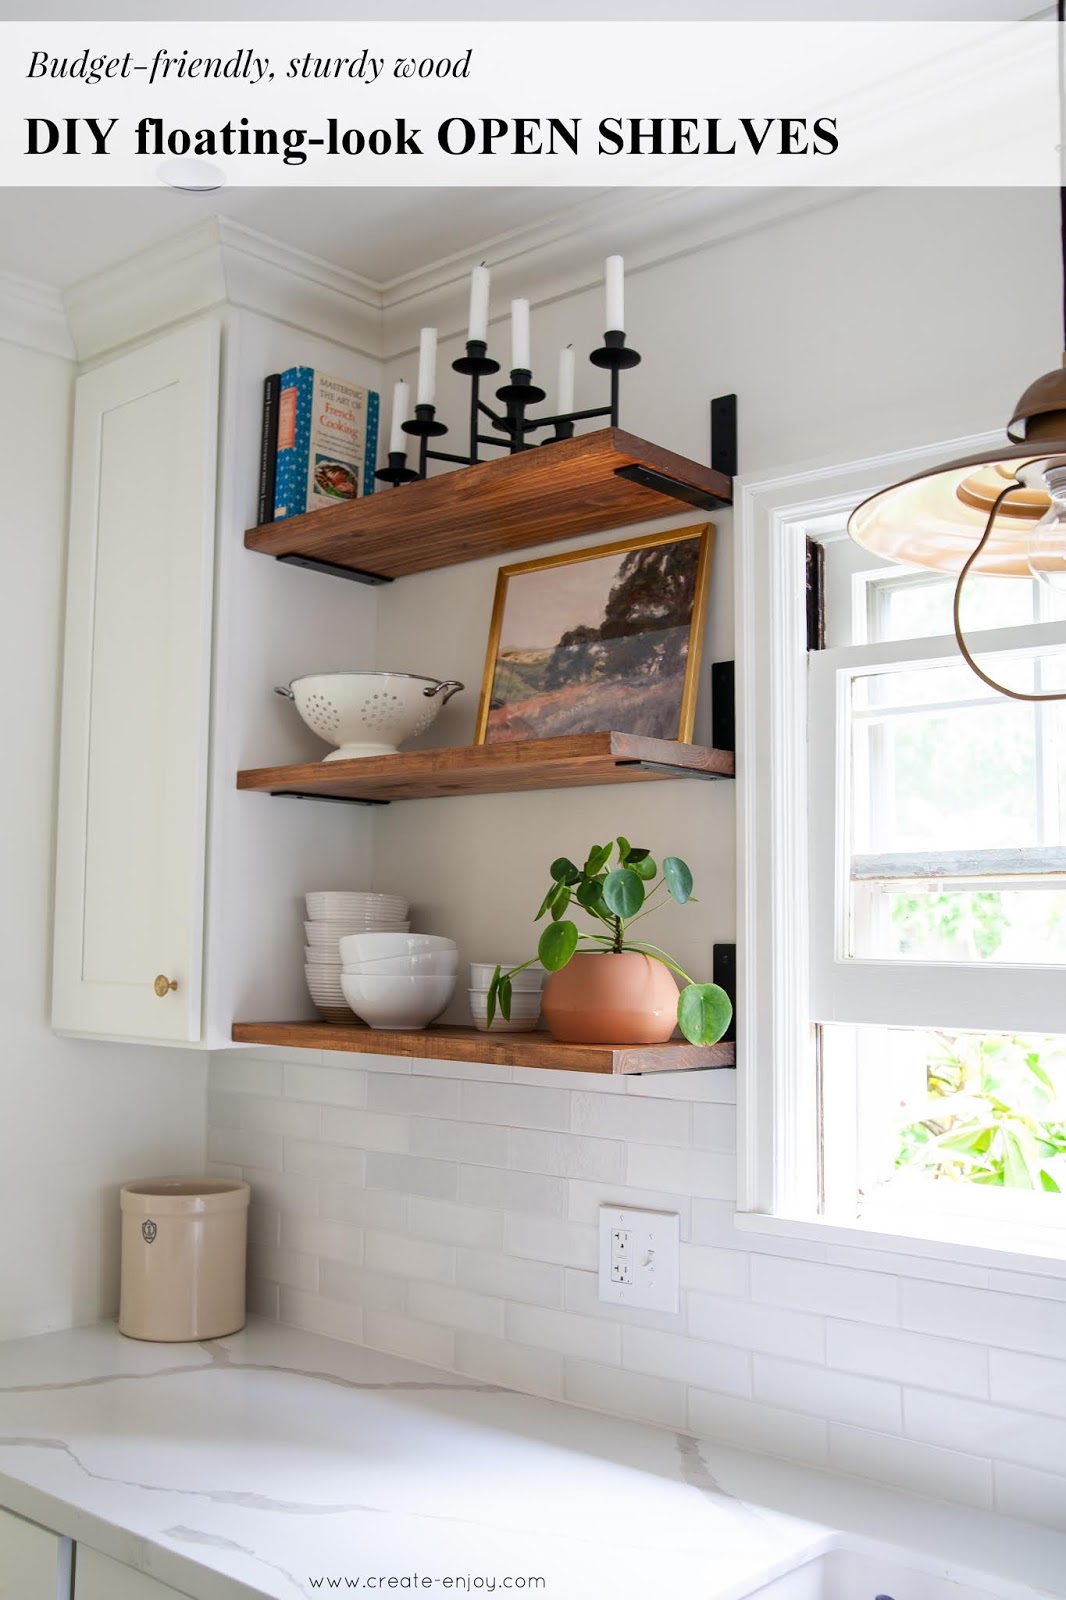 Diy Budget Friendly Floating Look Open, How To Hang Floating Shelves On Ceramic Tile